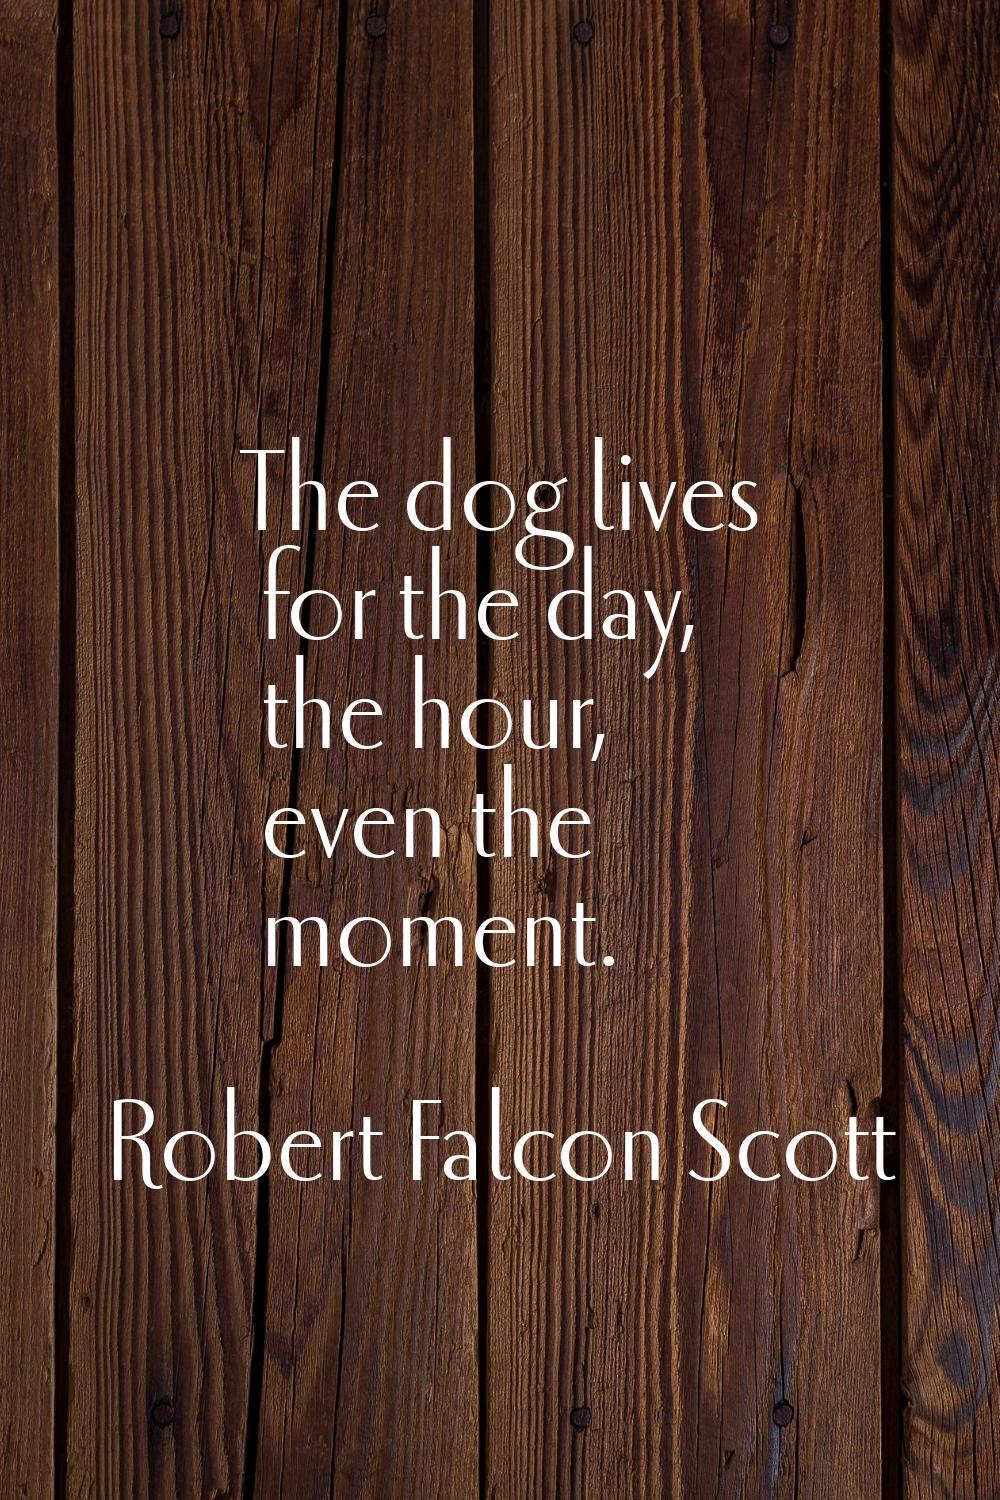 The dog lives for the day, the hour, even the moment.